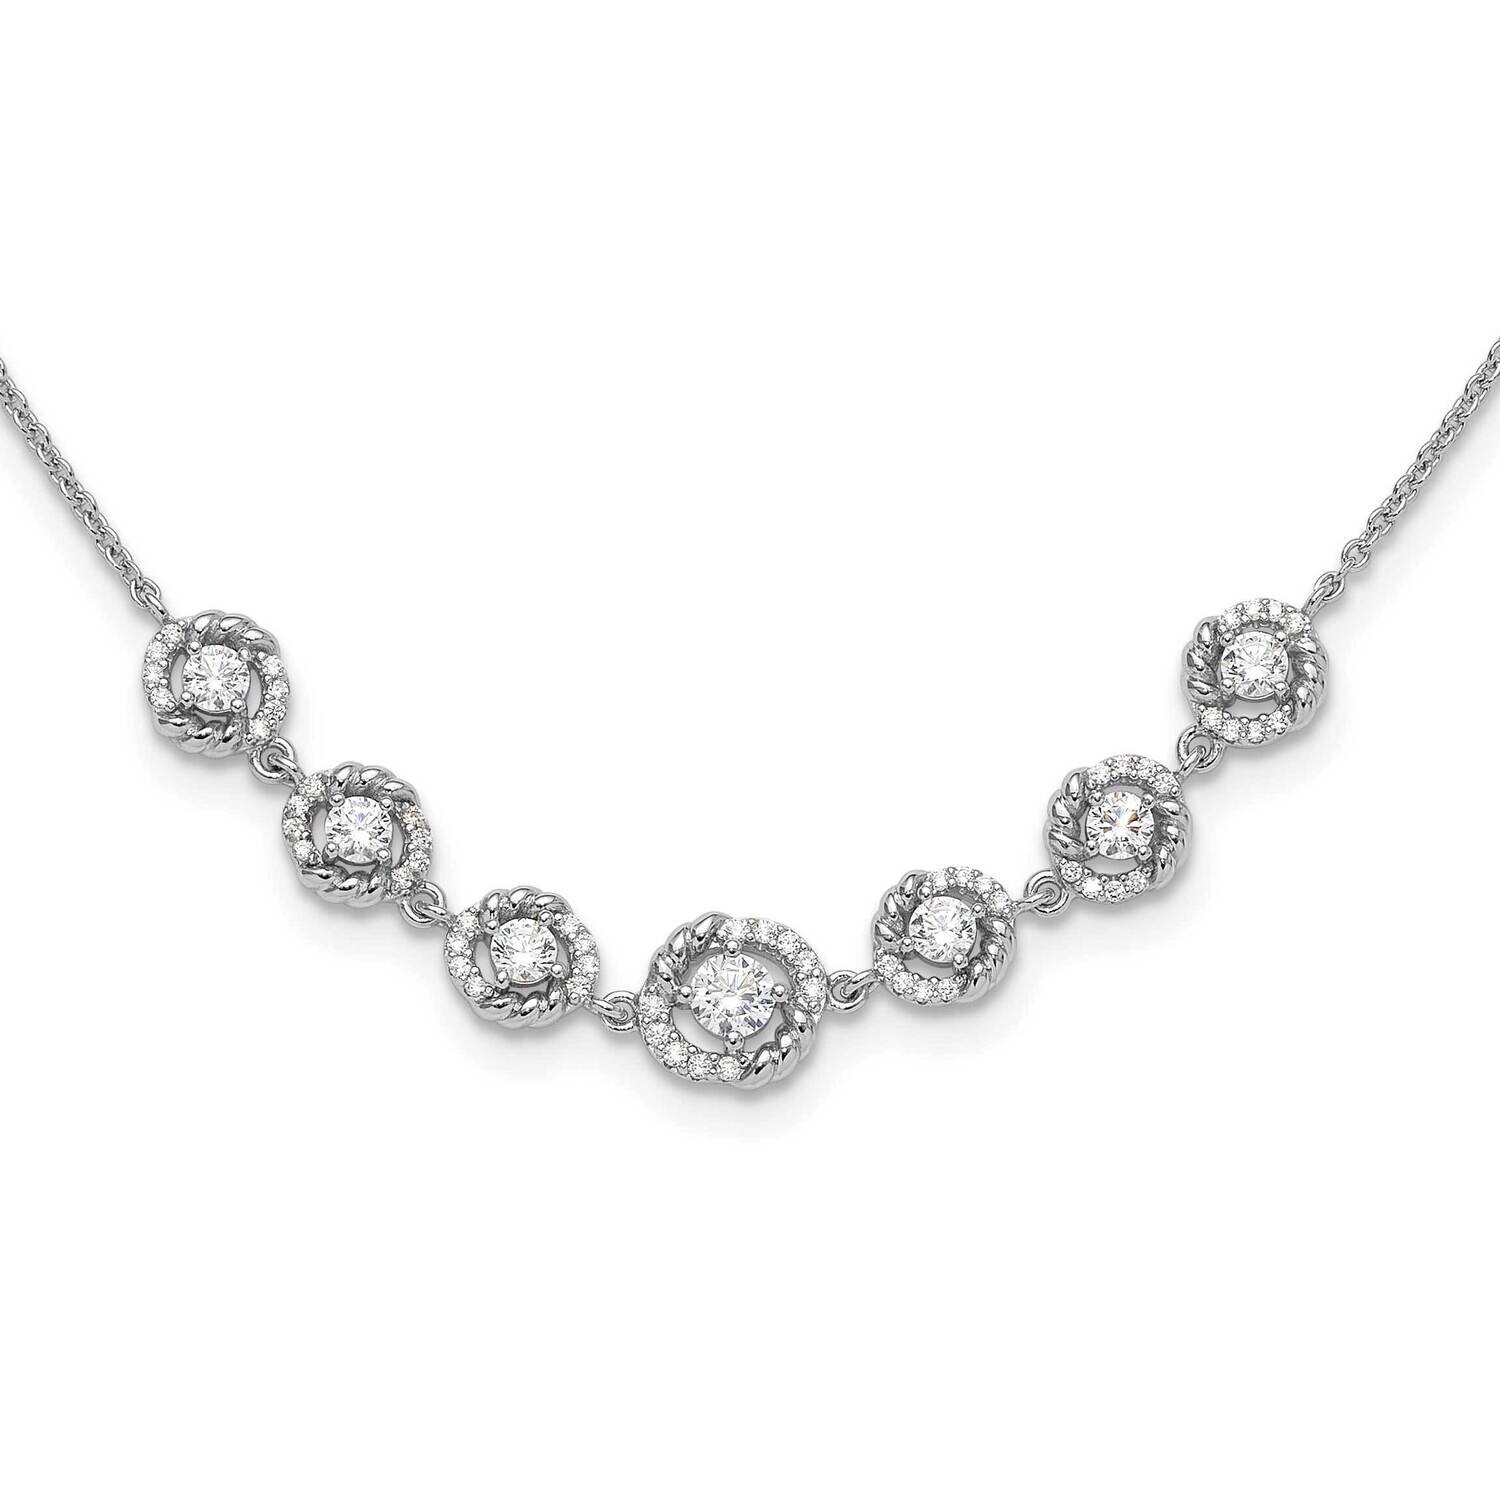 Fancy CZ 17.75 Inch 2 Inch Extension Necklace Sterling Silver Rhodium-Plated QG6488-17